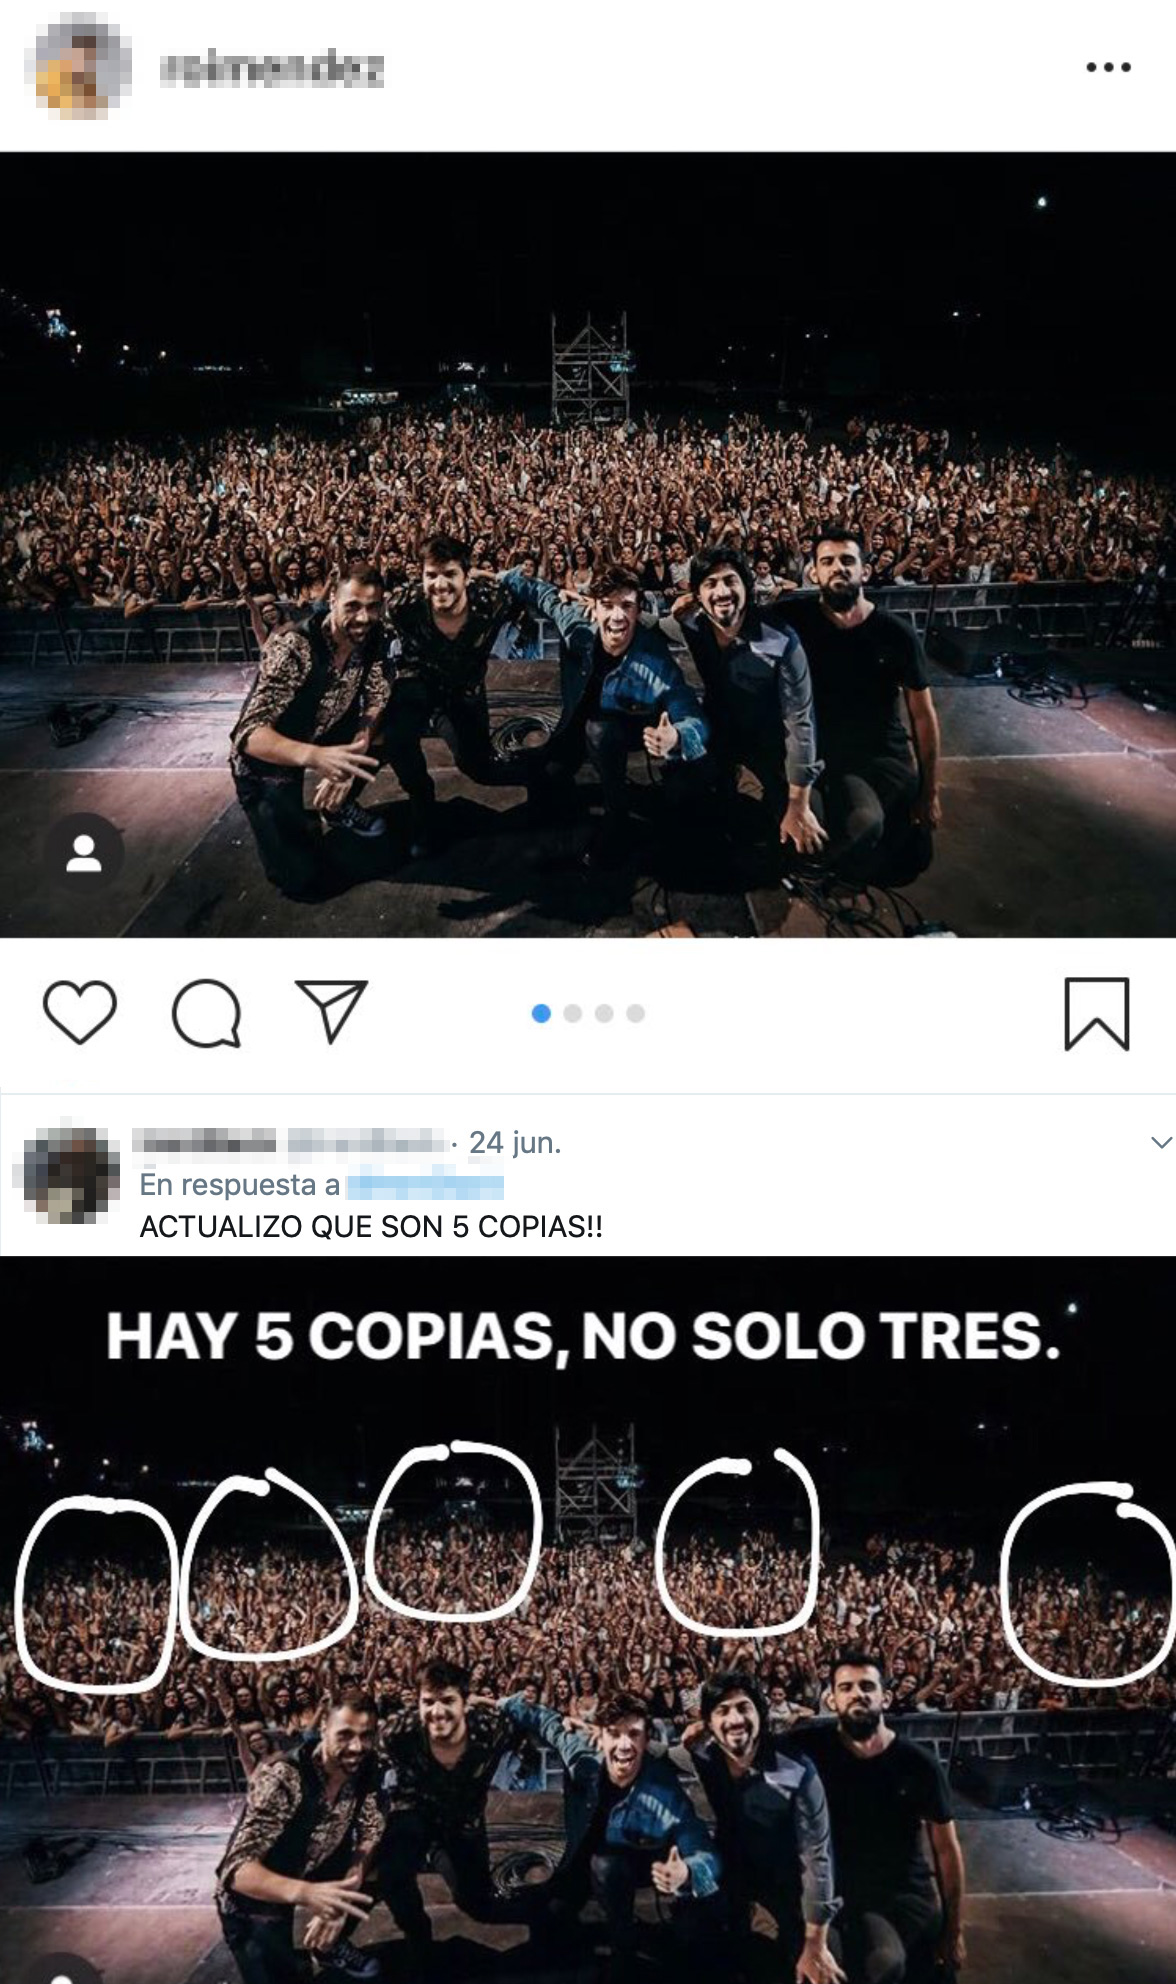 Spanish singer caught cloning his audience to make it look as if the concert was packed.